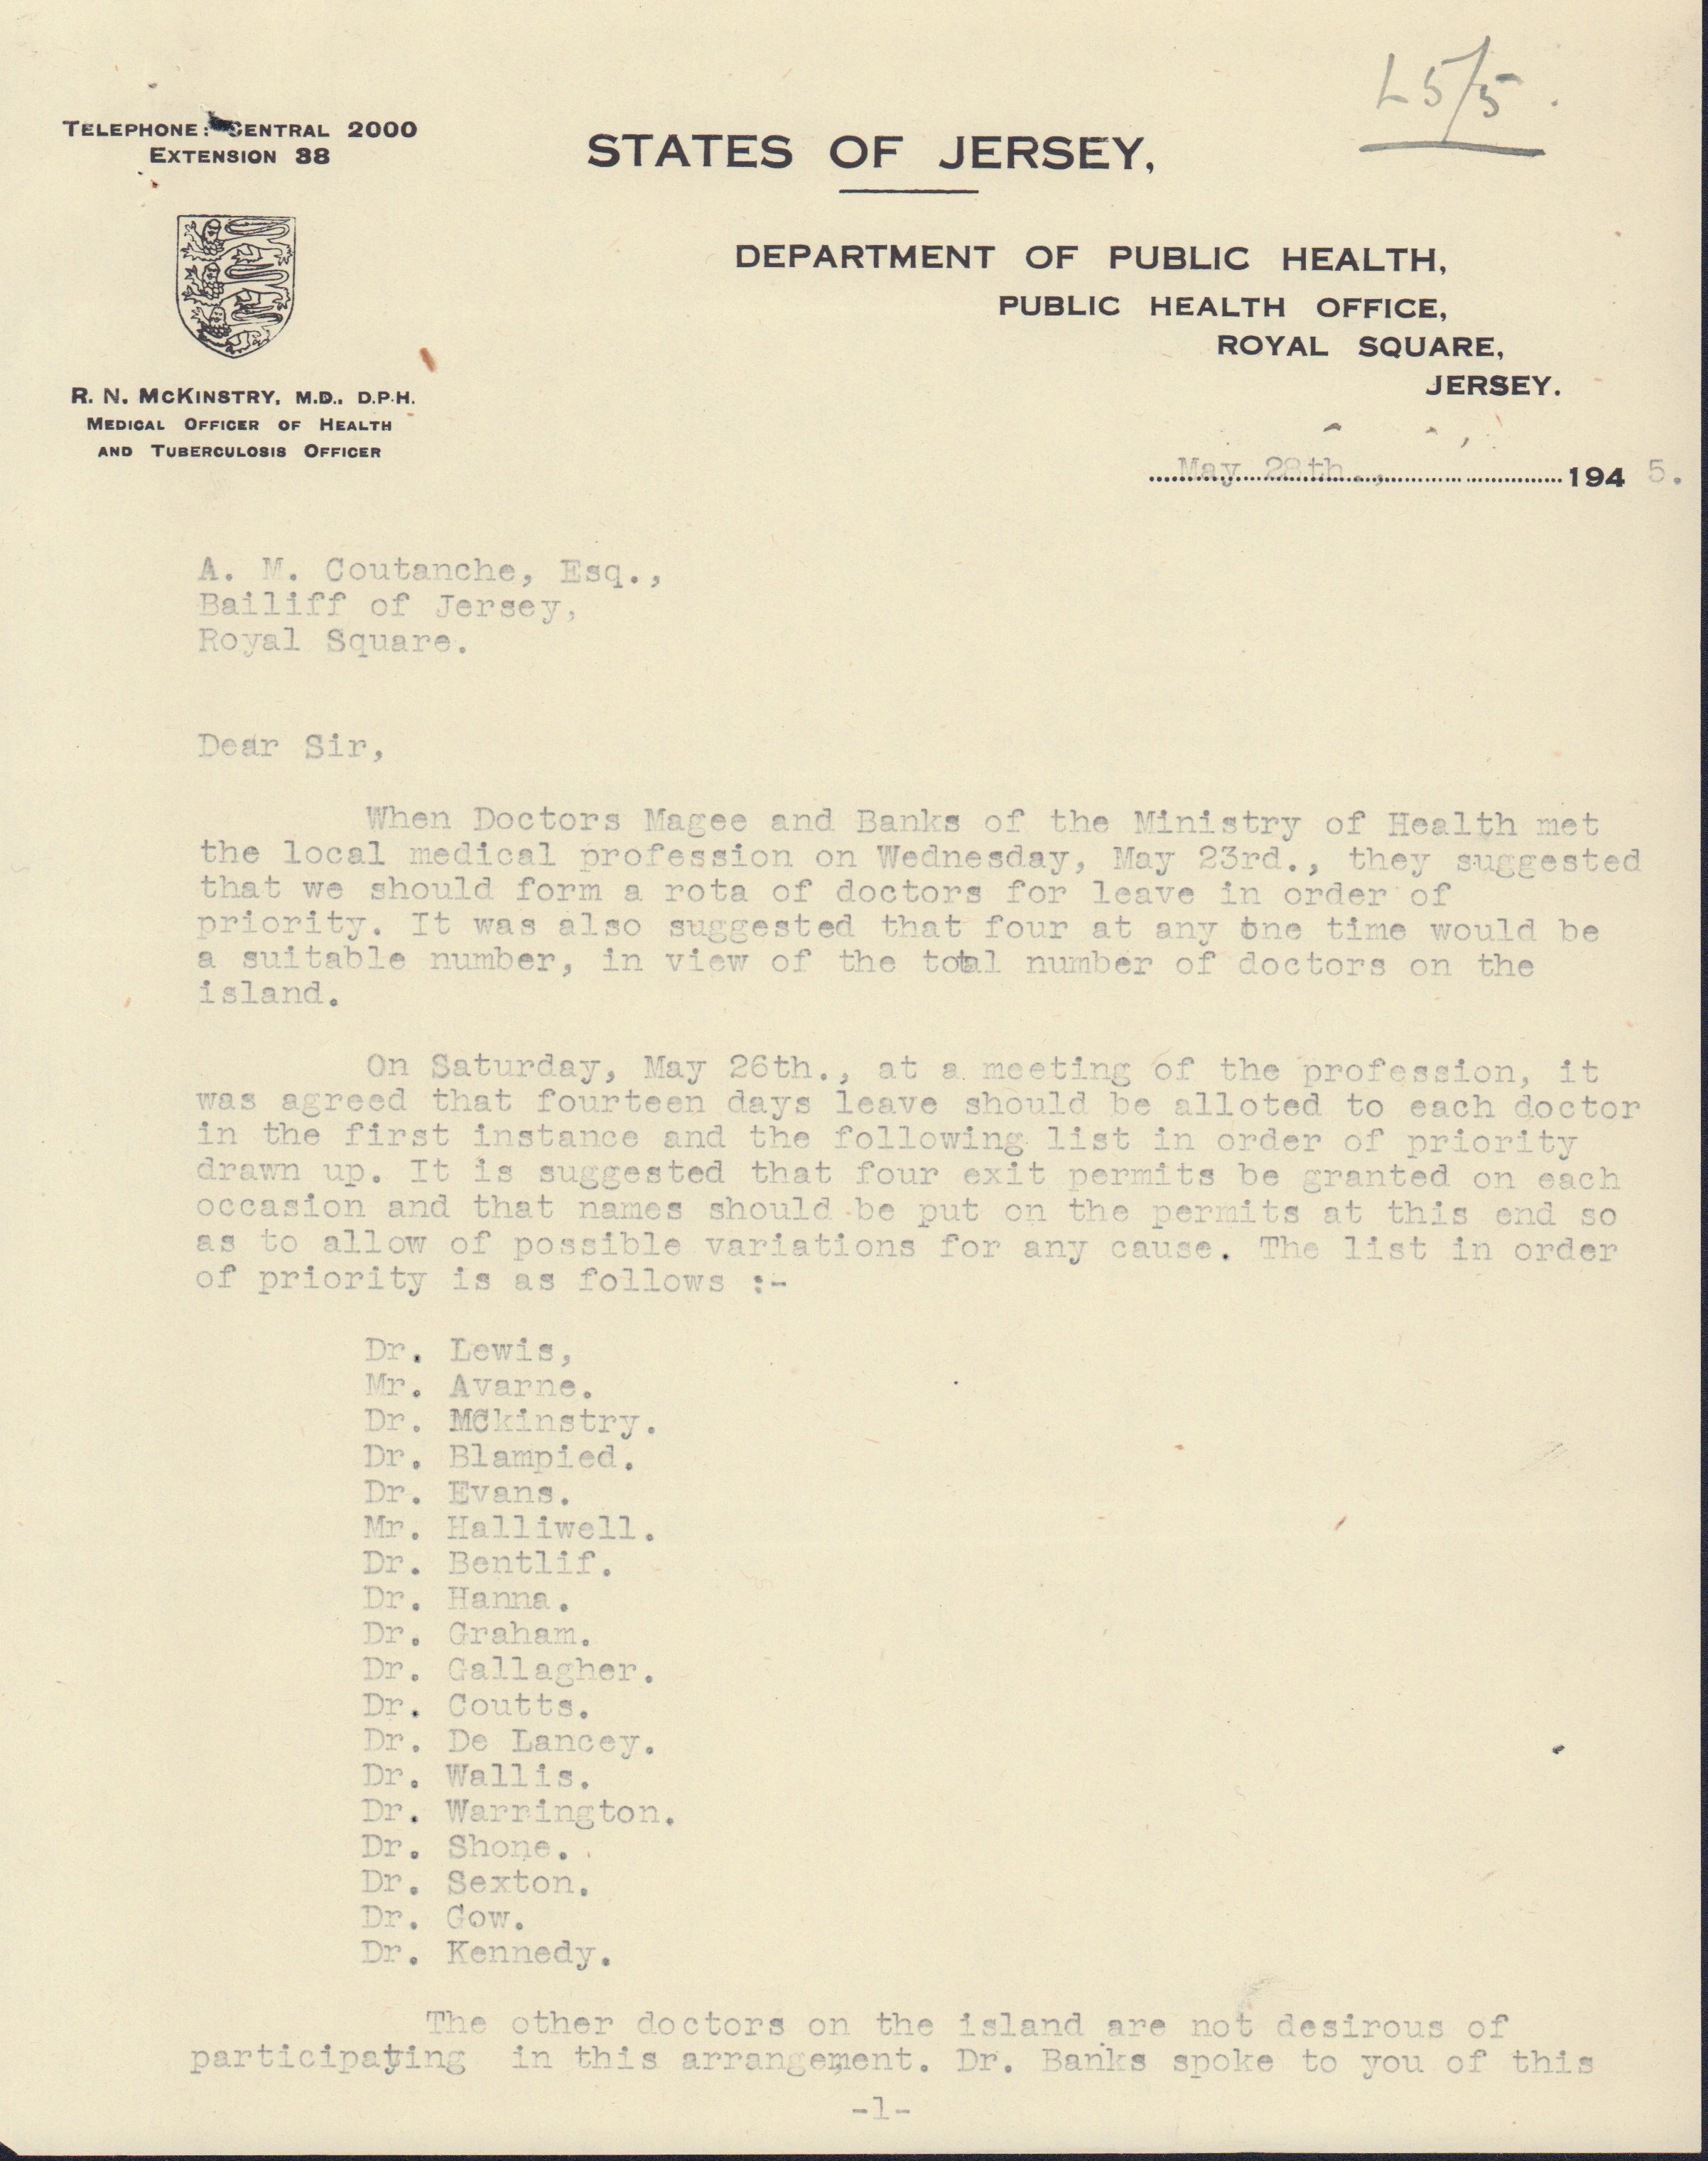 Dept_of_Public_Health_confirming_leave_for_doctors_and_rota_1945_Jersey_Heritage.jpg